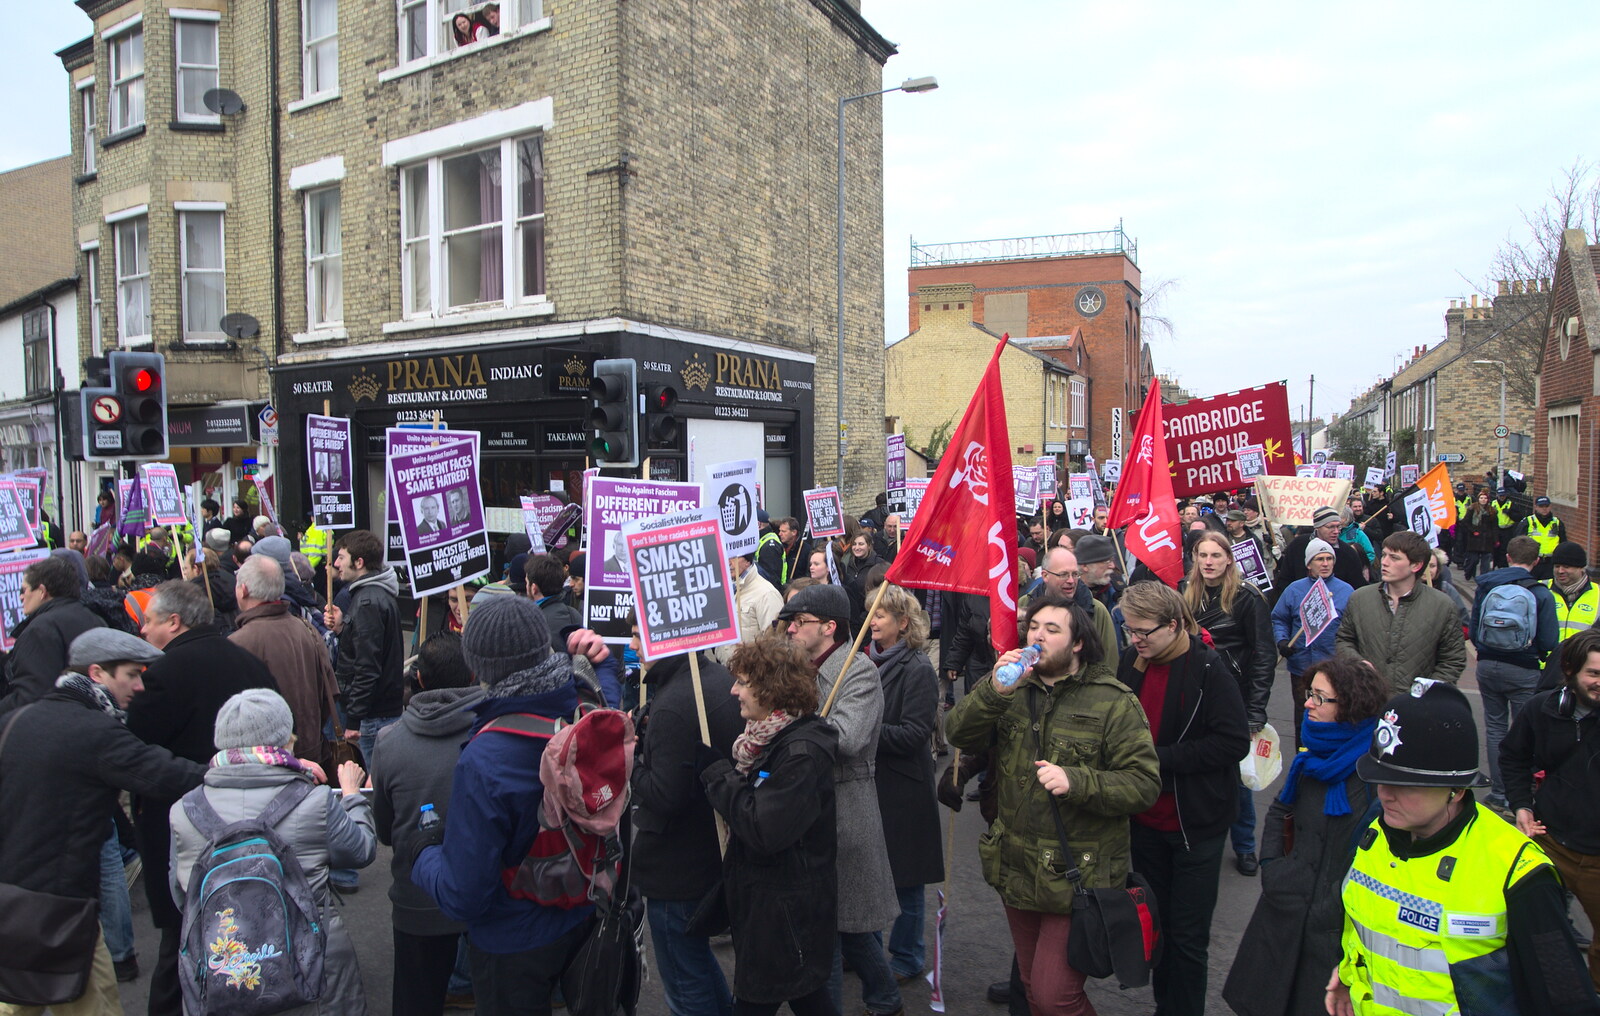 The marchers are released on to Mill Road from An Anti-Fascist March, Mill Road, Cambridge - 23rd February 2013